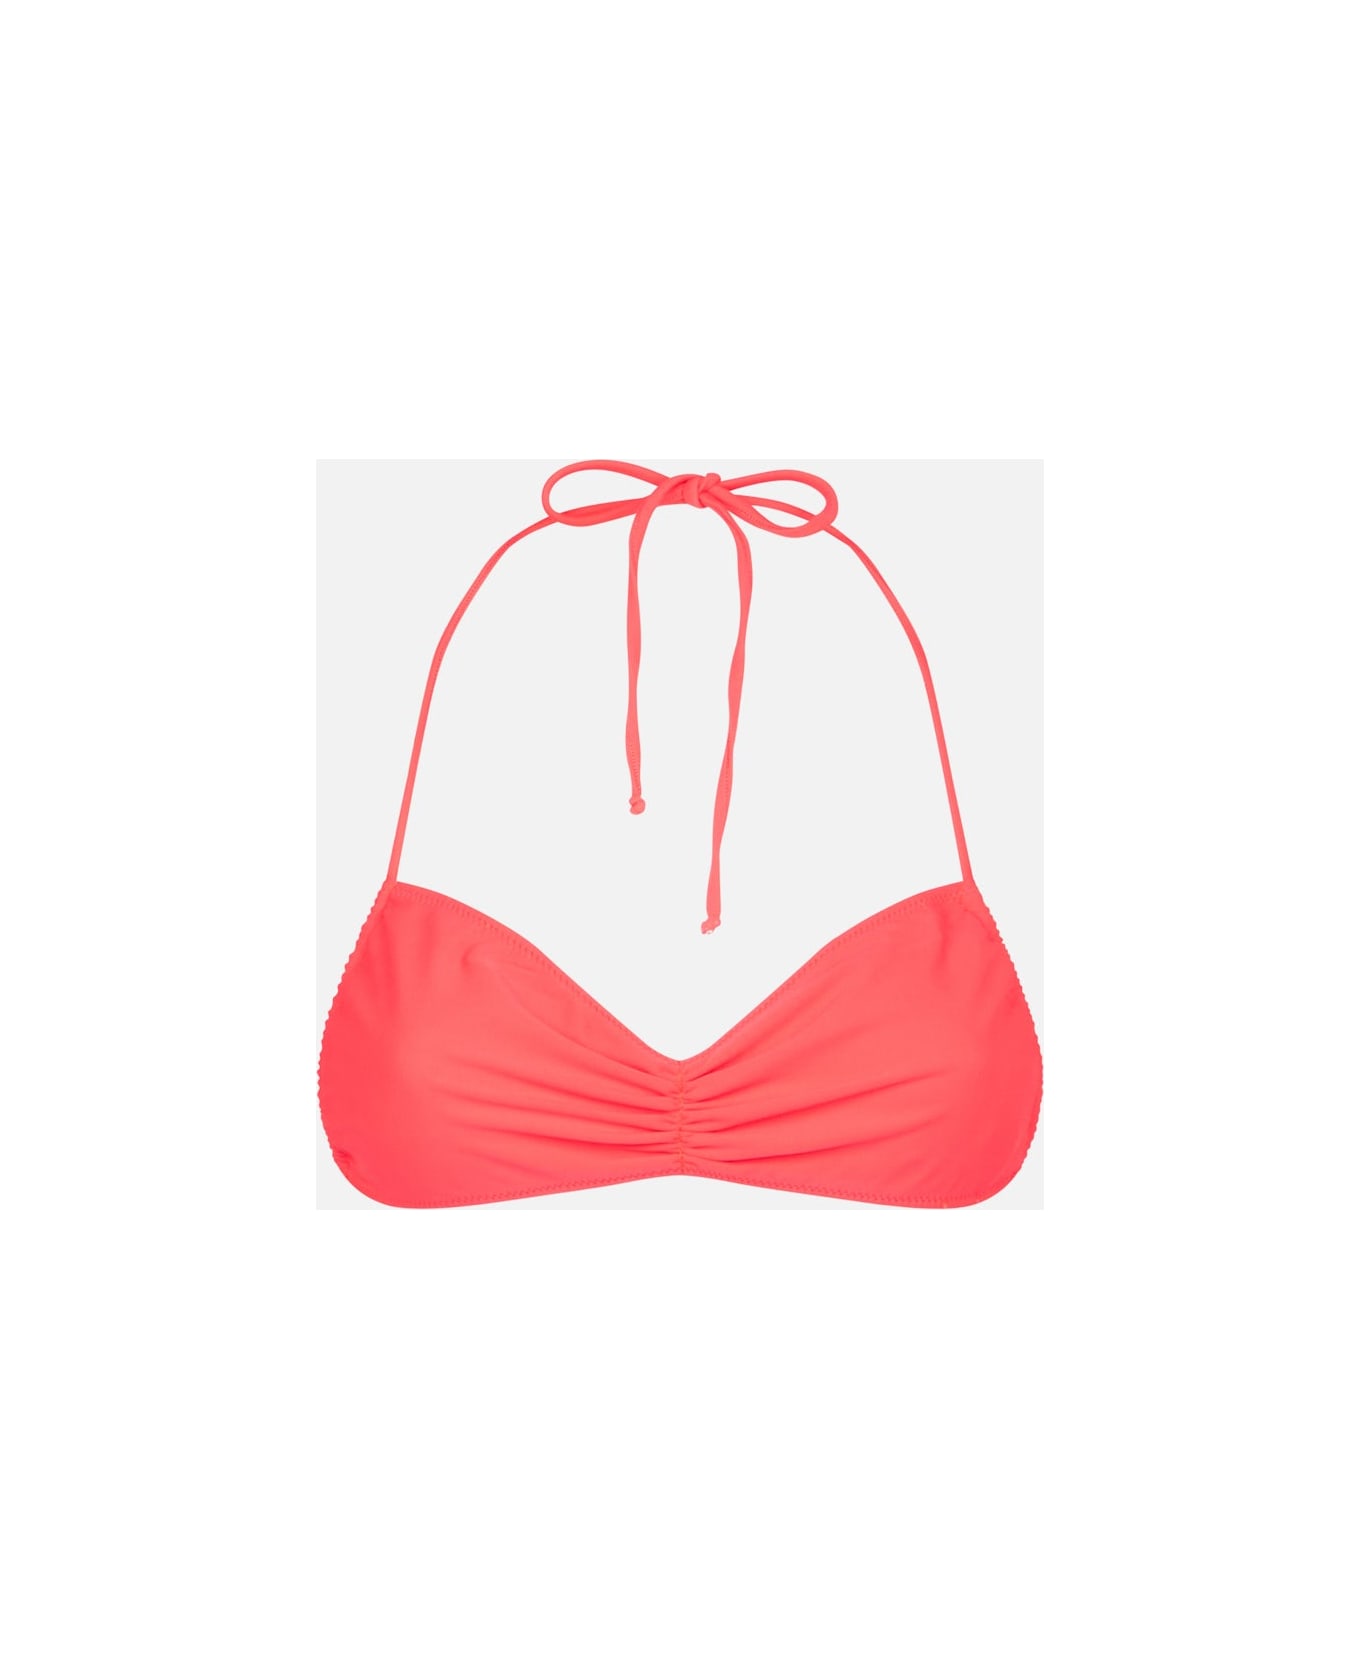 MC2 Saint Barth Woman Fluo Red Bandeau Top Swimsuit - FLUO